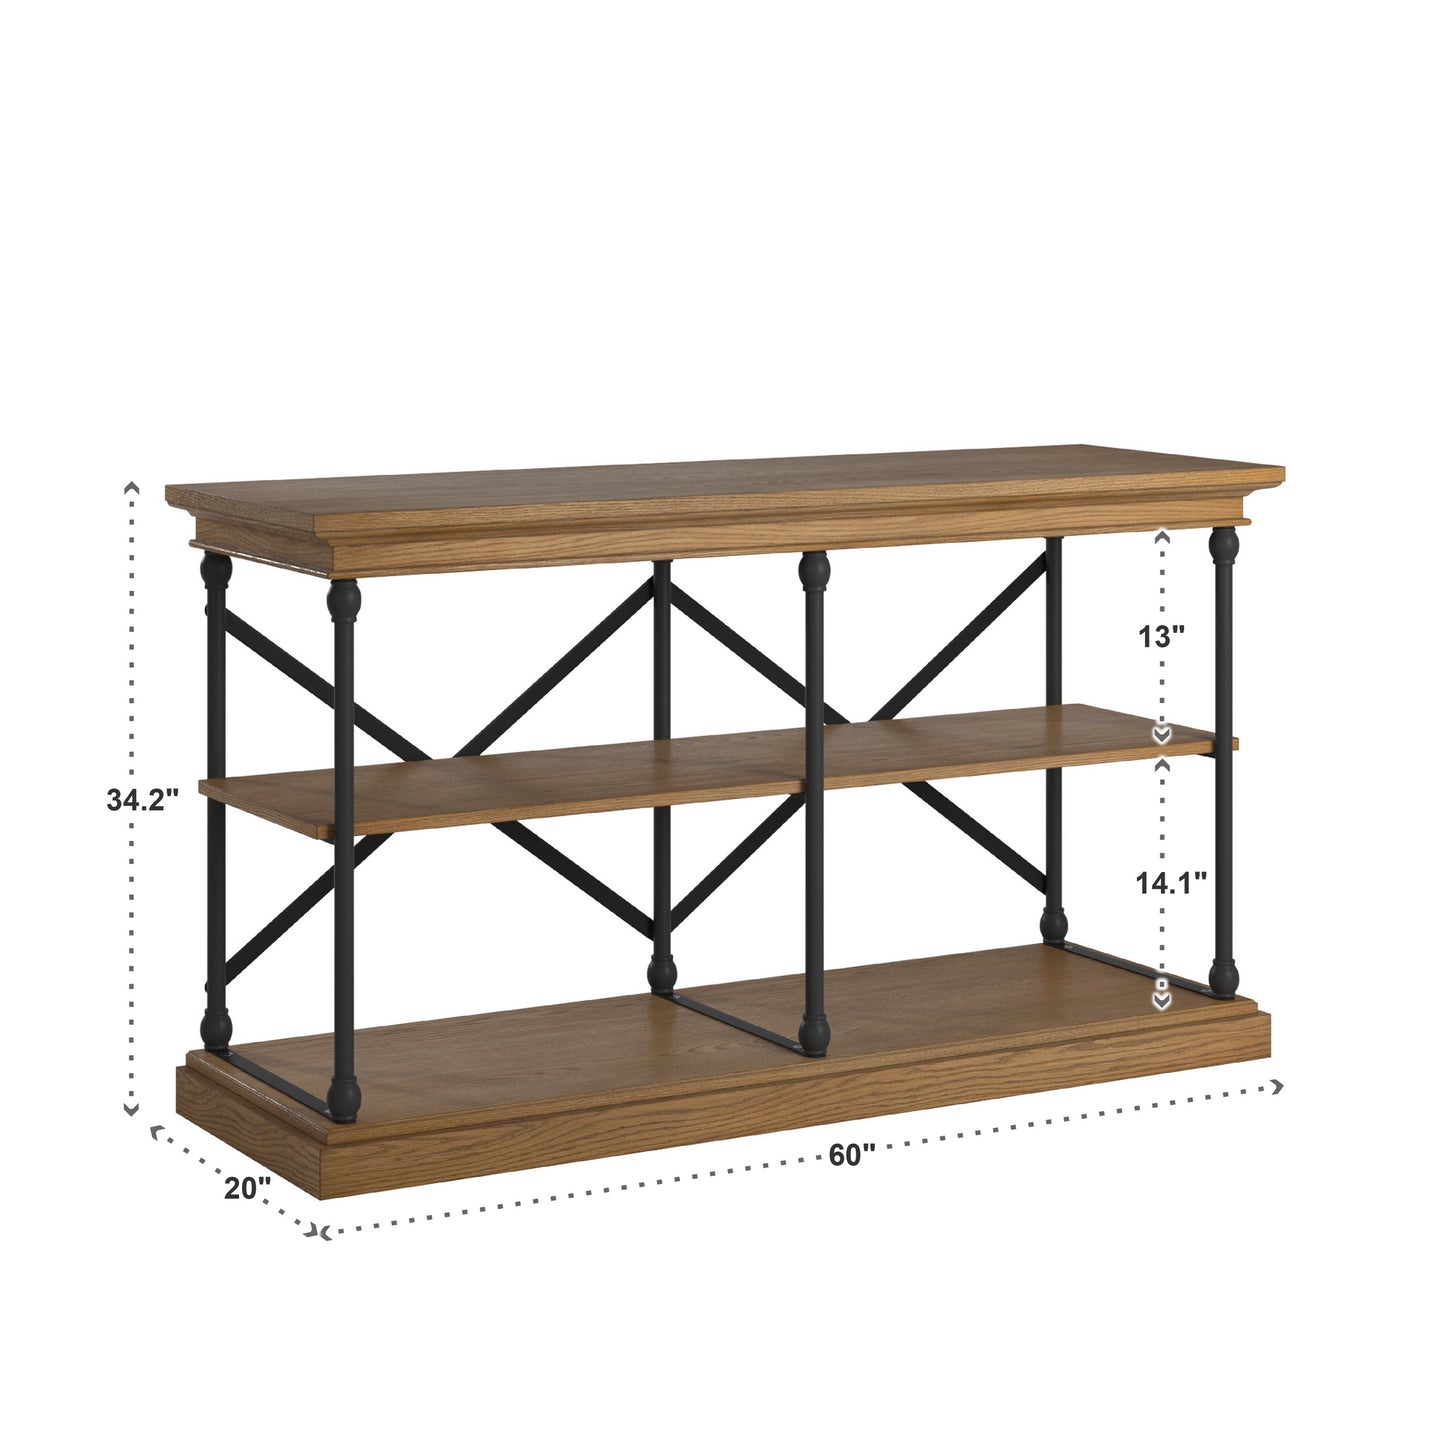 Cornice Iron and Wood Entryway Console Table - Brown Finish